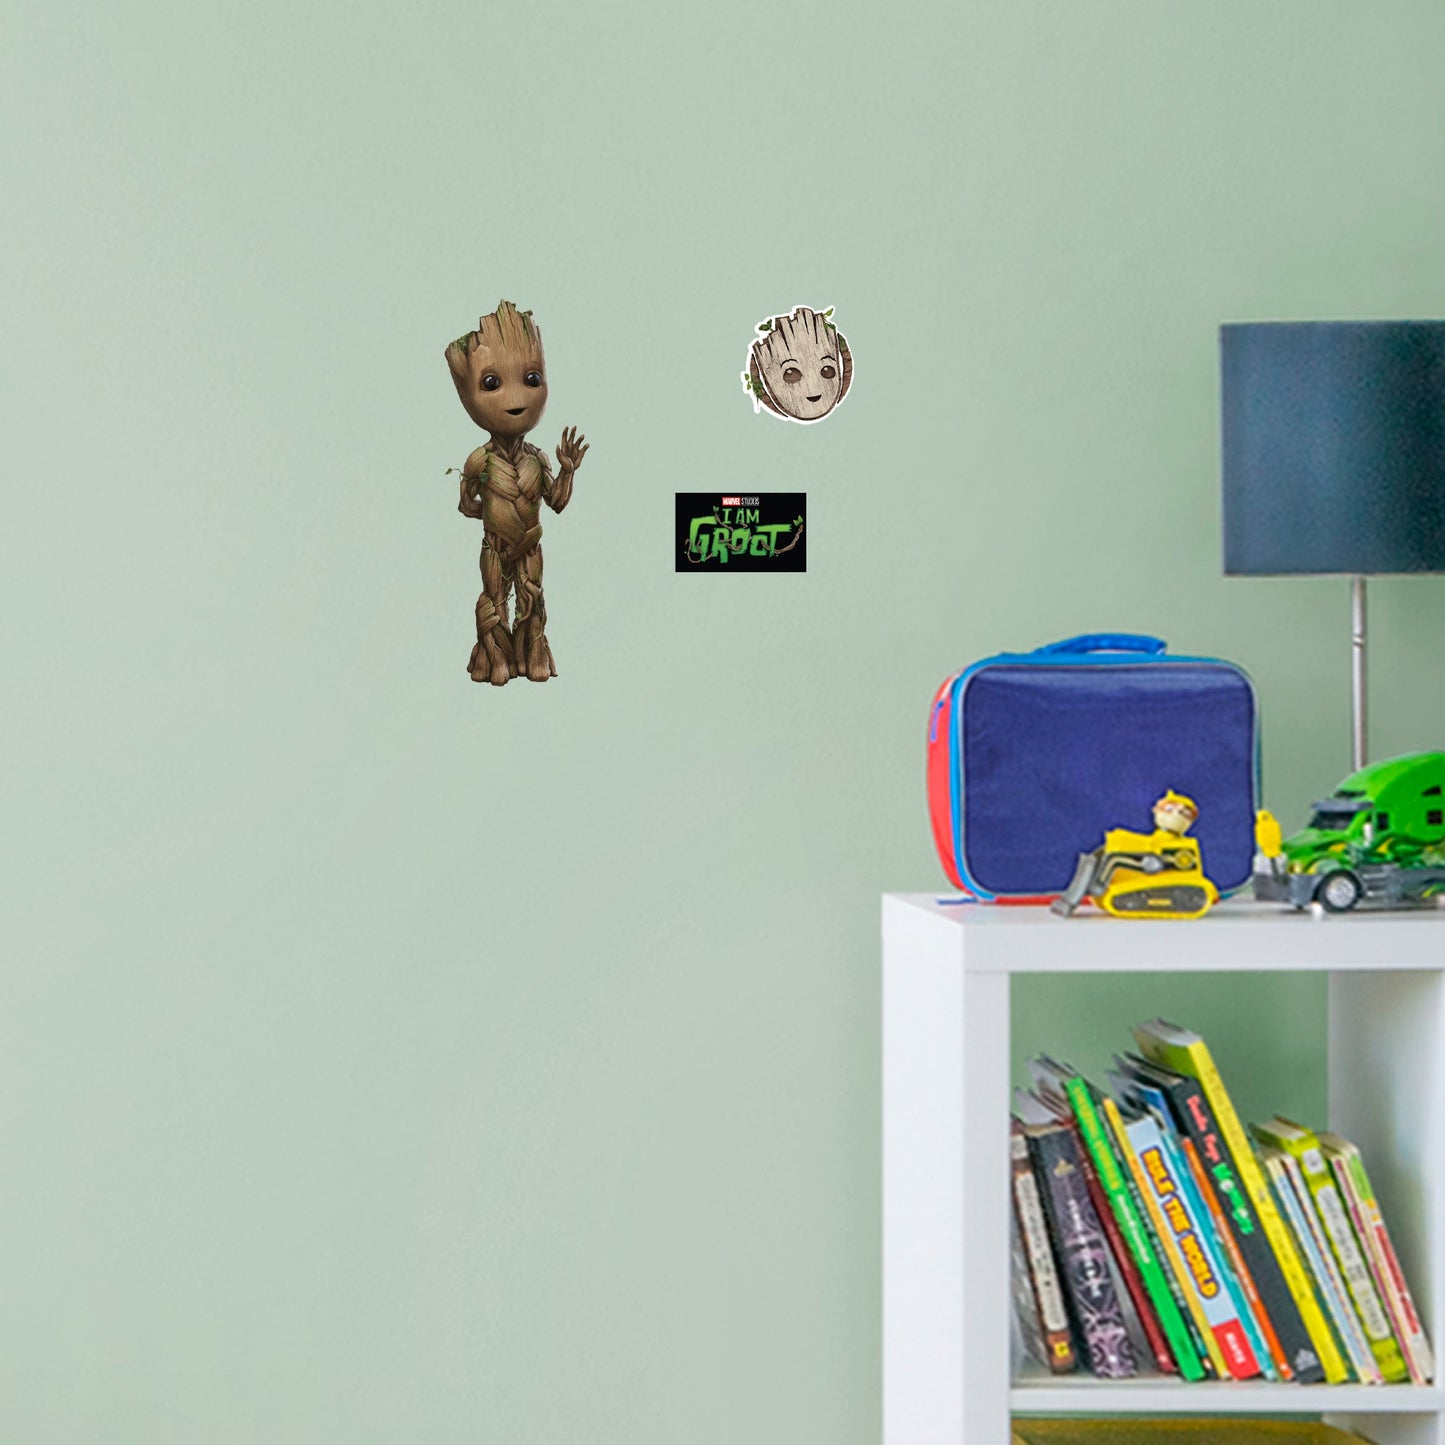 I am Groot: Groot RealBig - Officially Licensed Marvel Removable Adhesive Decal